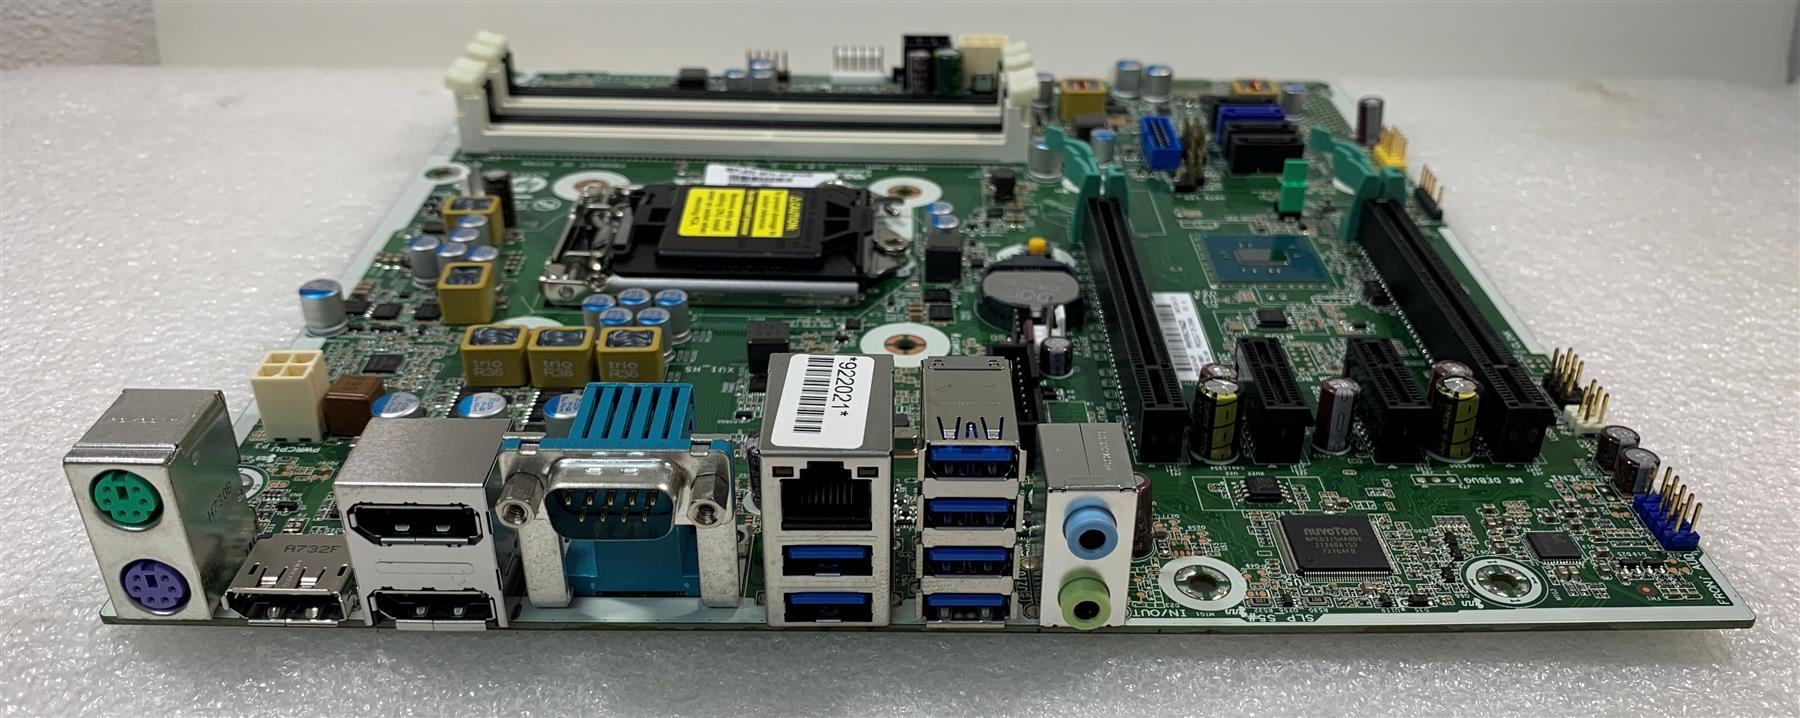 HP Z238 Microtower Workstation 839052-001 501 601 Motherboard System B